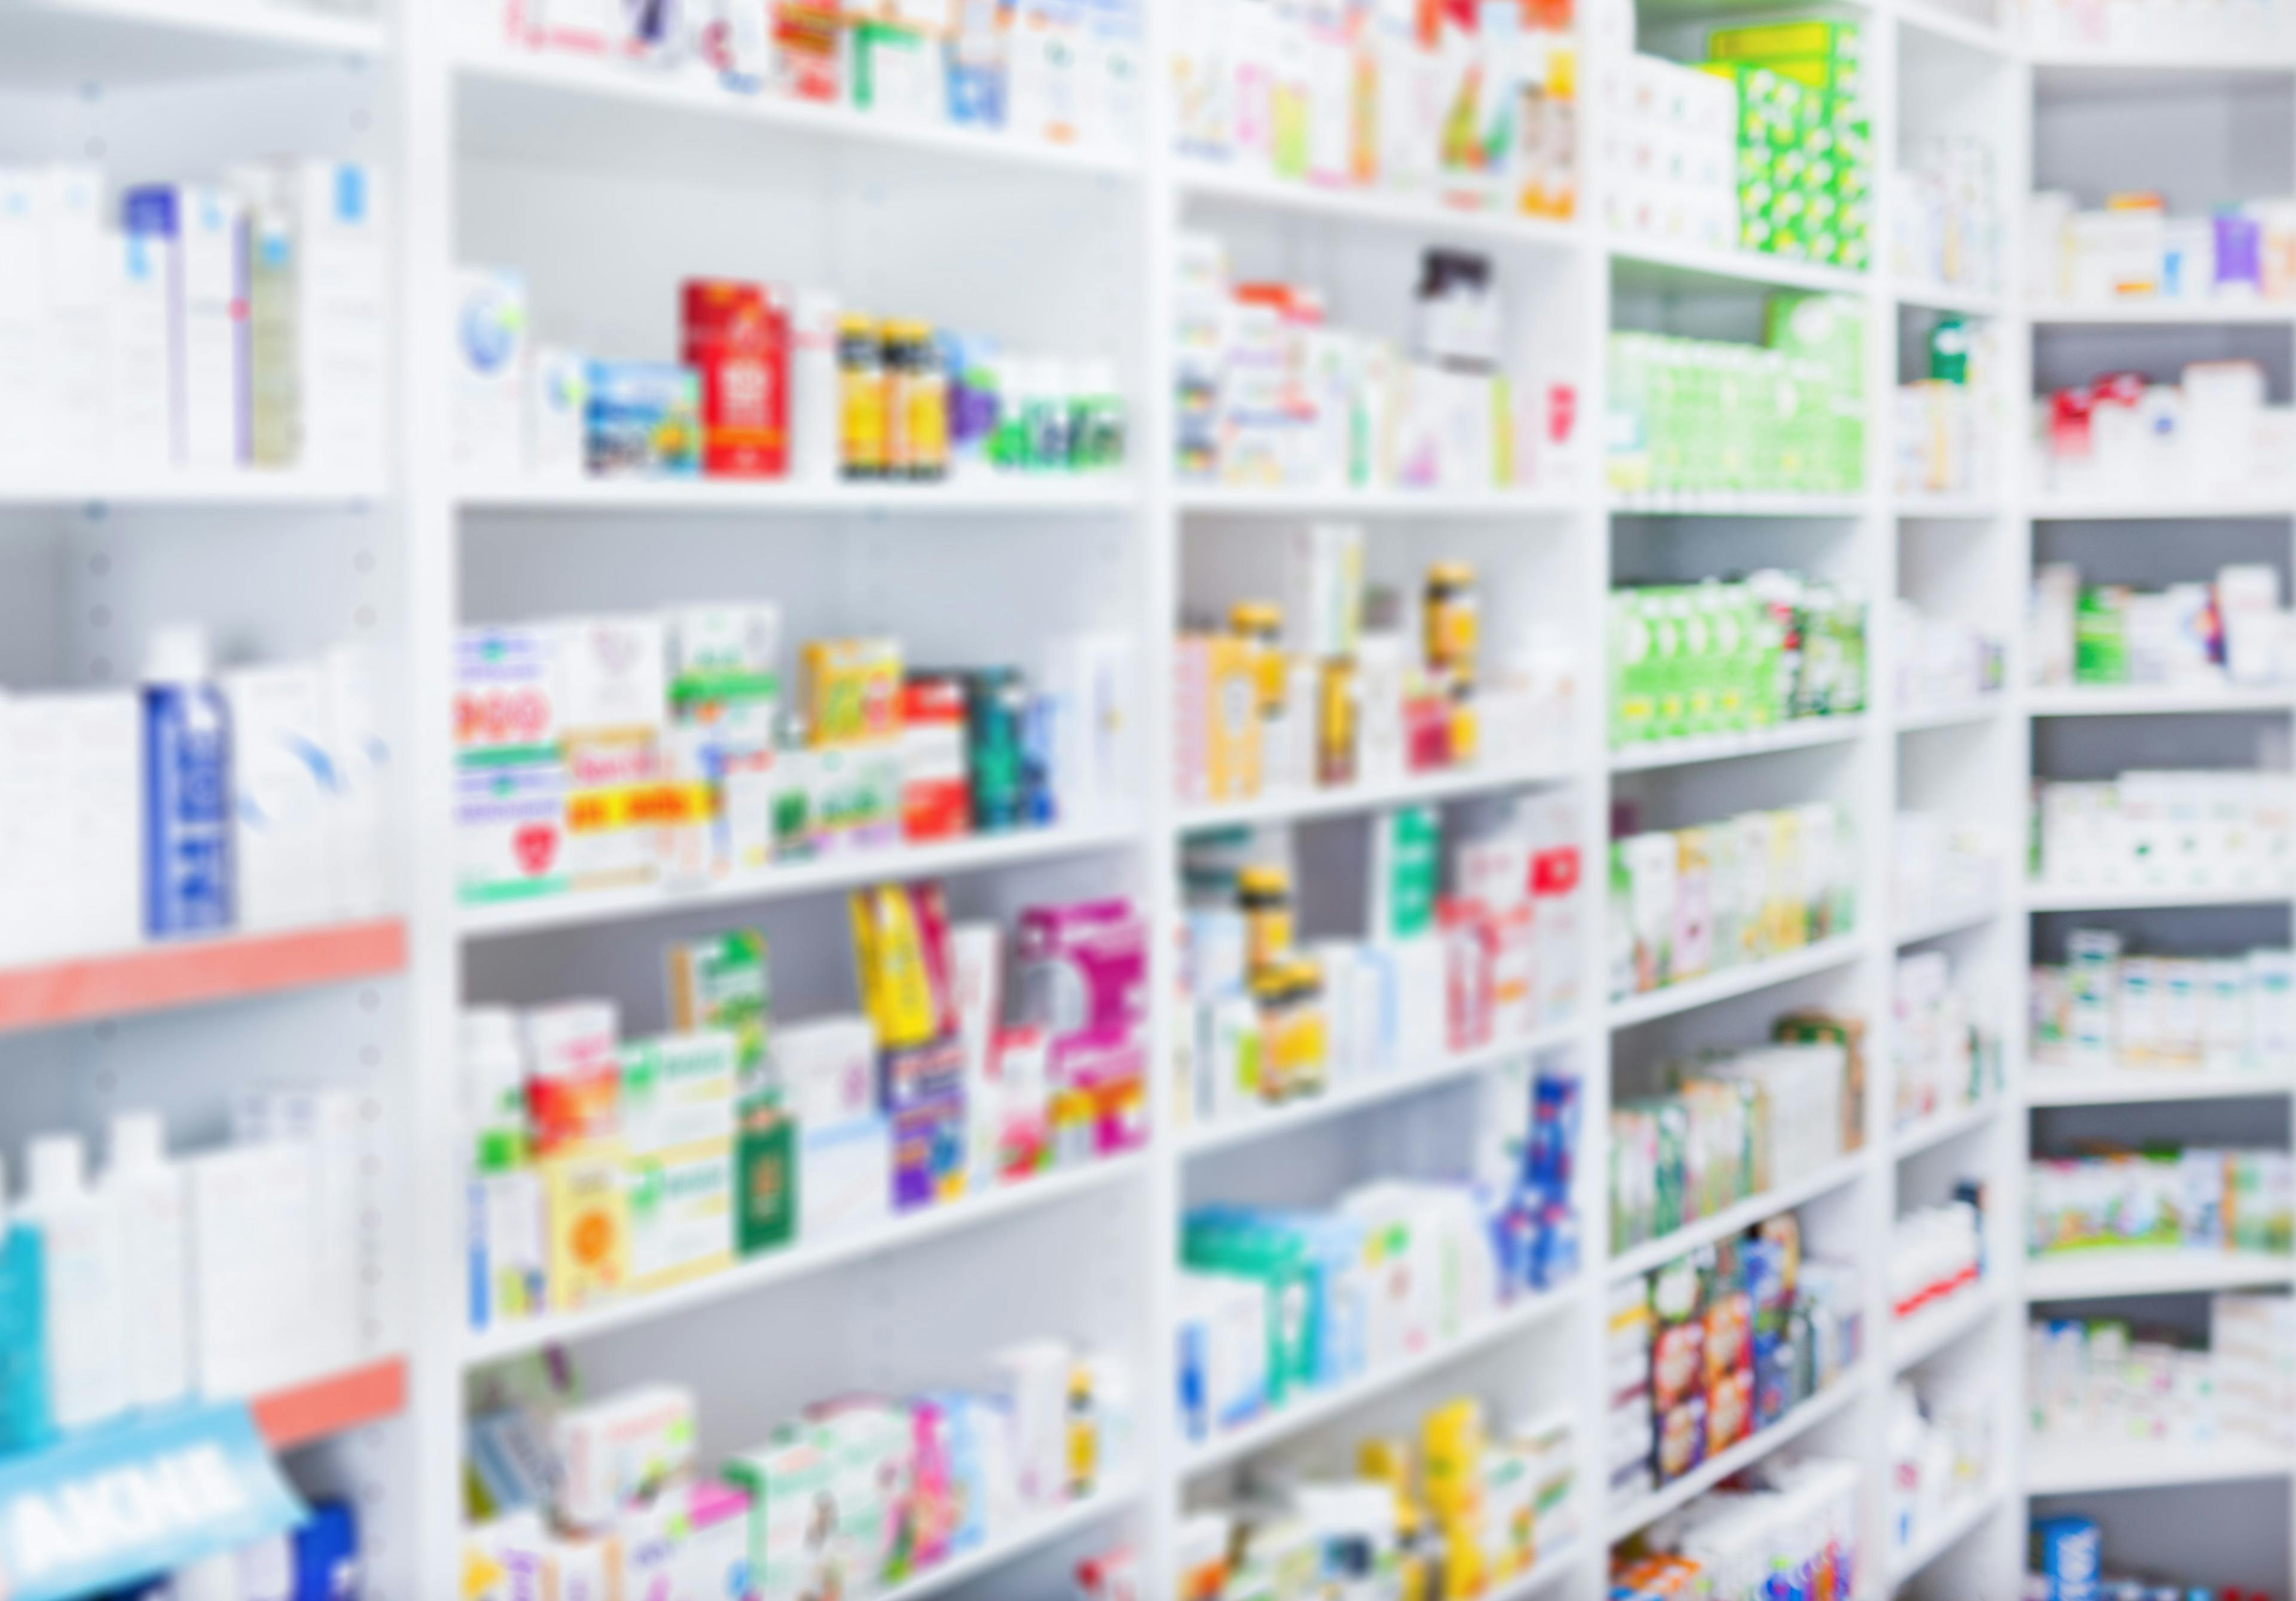 Pharmacists: Expanding Clinical Services to Meet the Needs of the Community